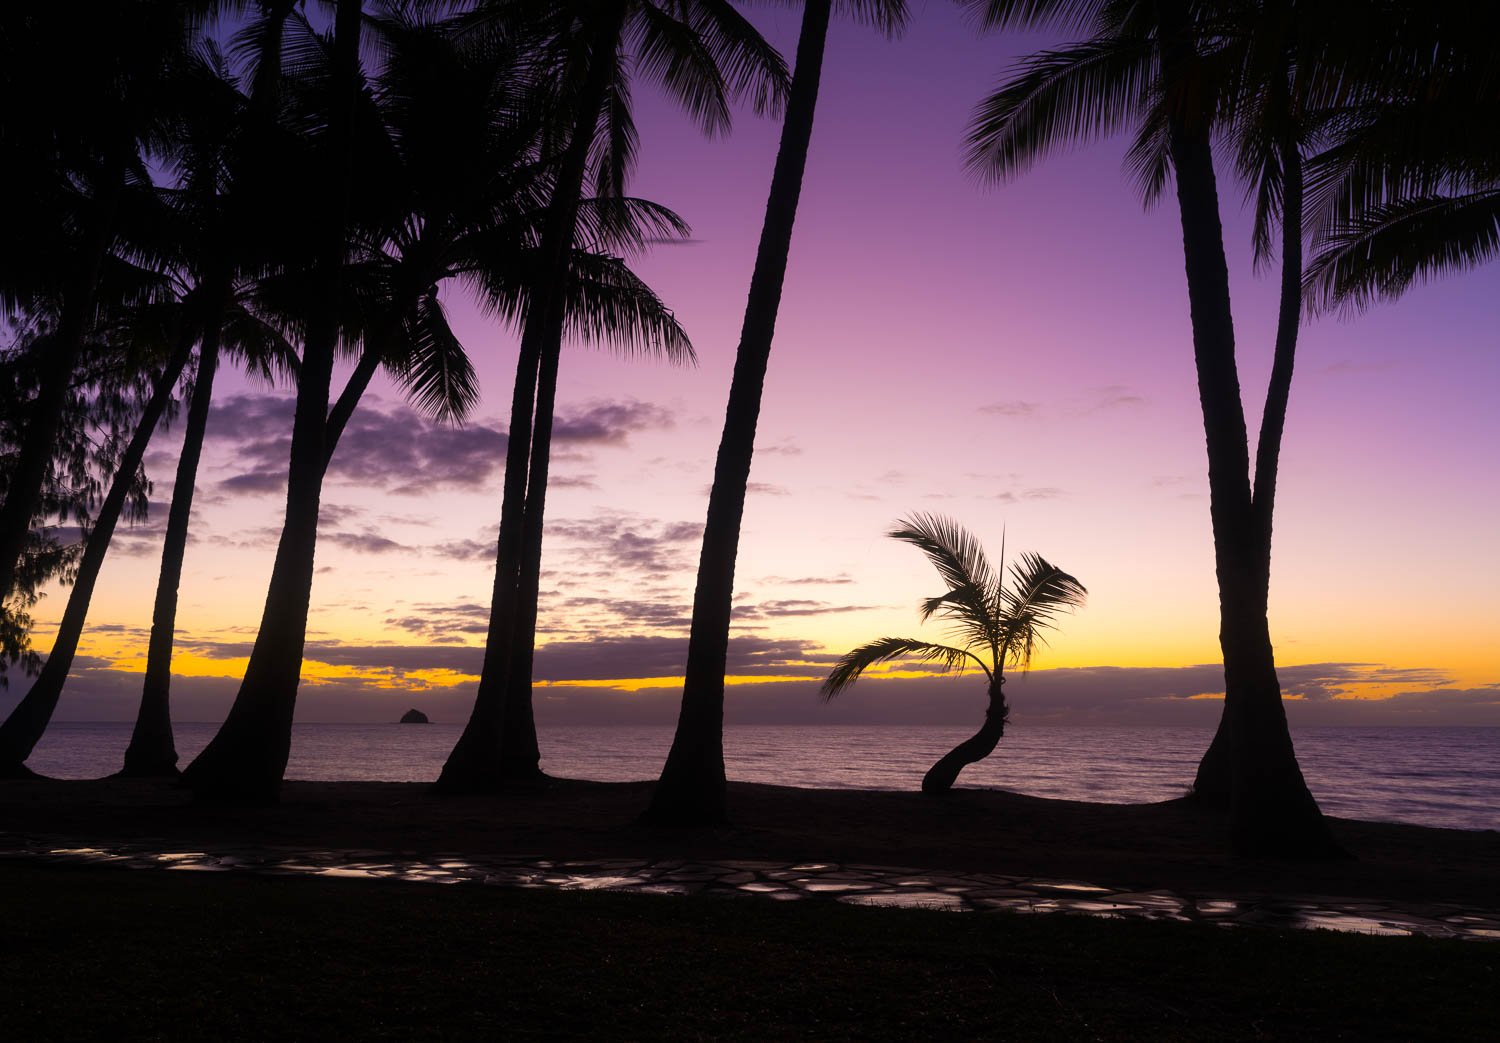 Long coconut trees standing tall in a row with the dark black effect of night shadow with a light purplish sky, and a sea connecting with the land, Catching Up, Lone Palm Tree, Palm Cove, Far North Queensland